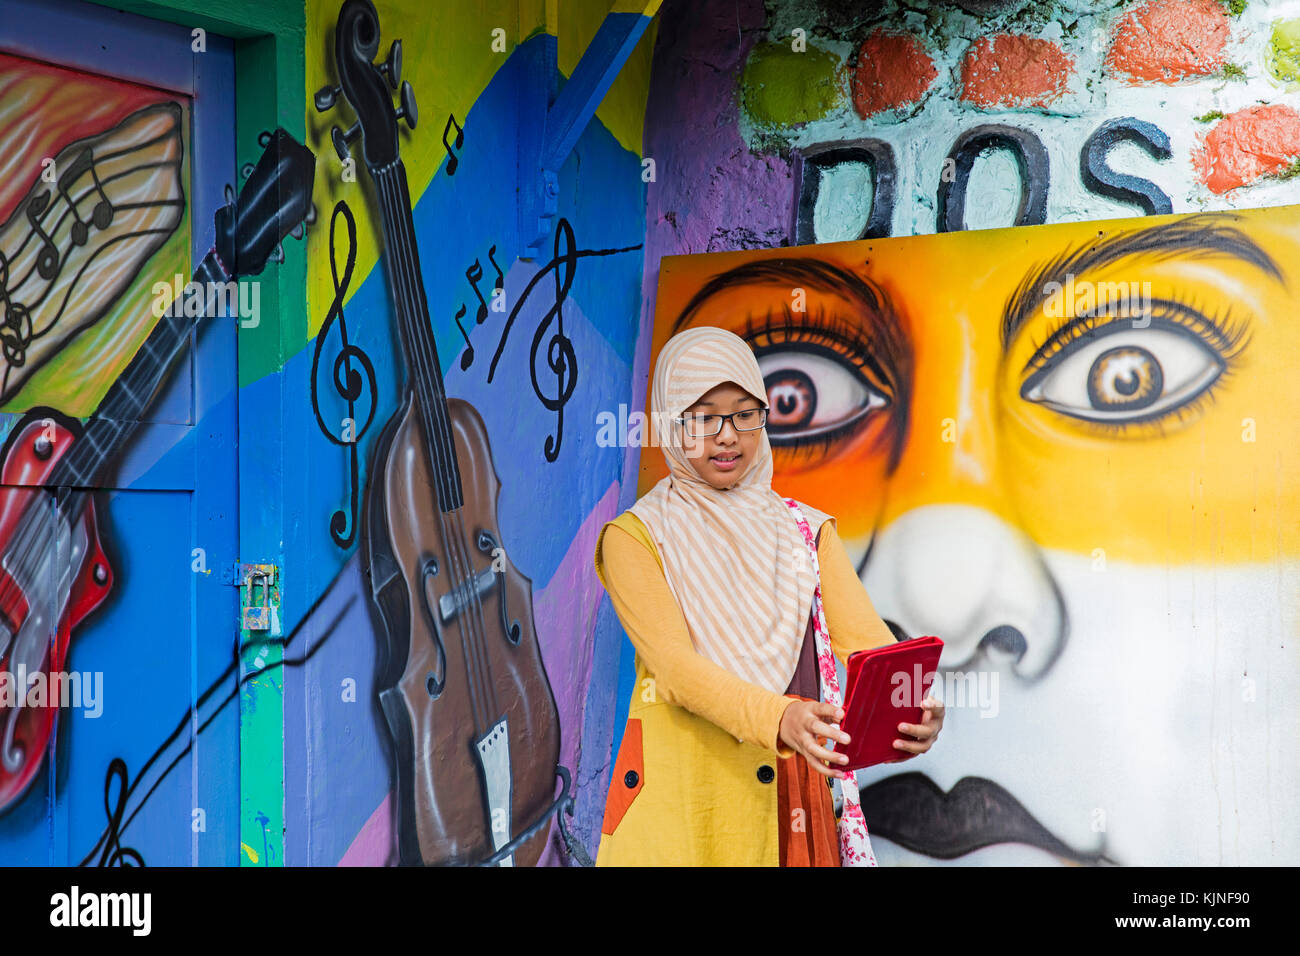 Young Indonesian girl taking selfie with tablet in Kampung Wisata Jodipan, artist suburb of the city Malang, Jawa Timur / East Java, Indonesia Stock Photo